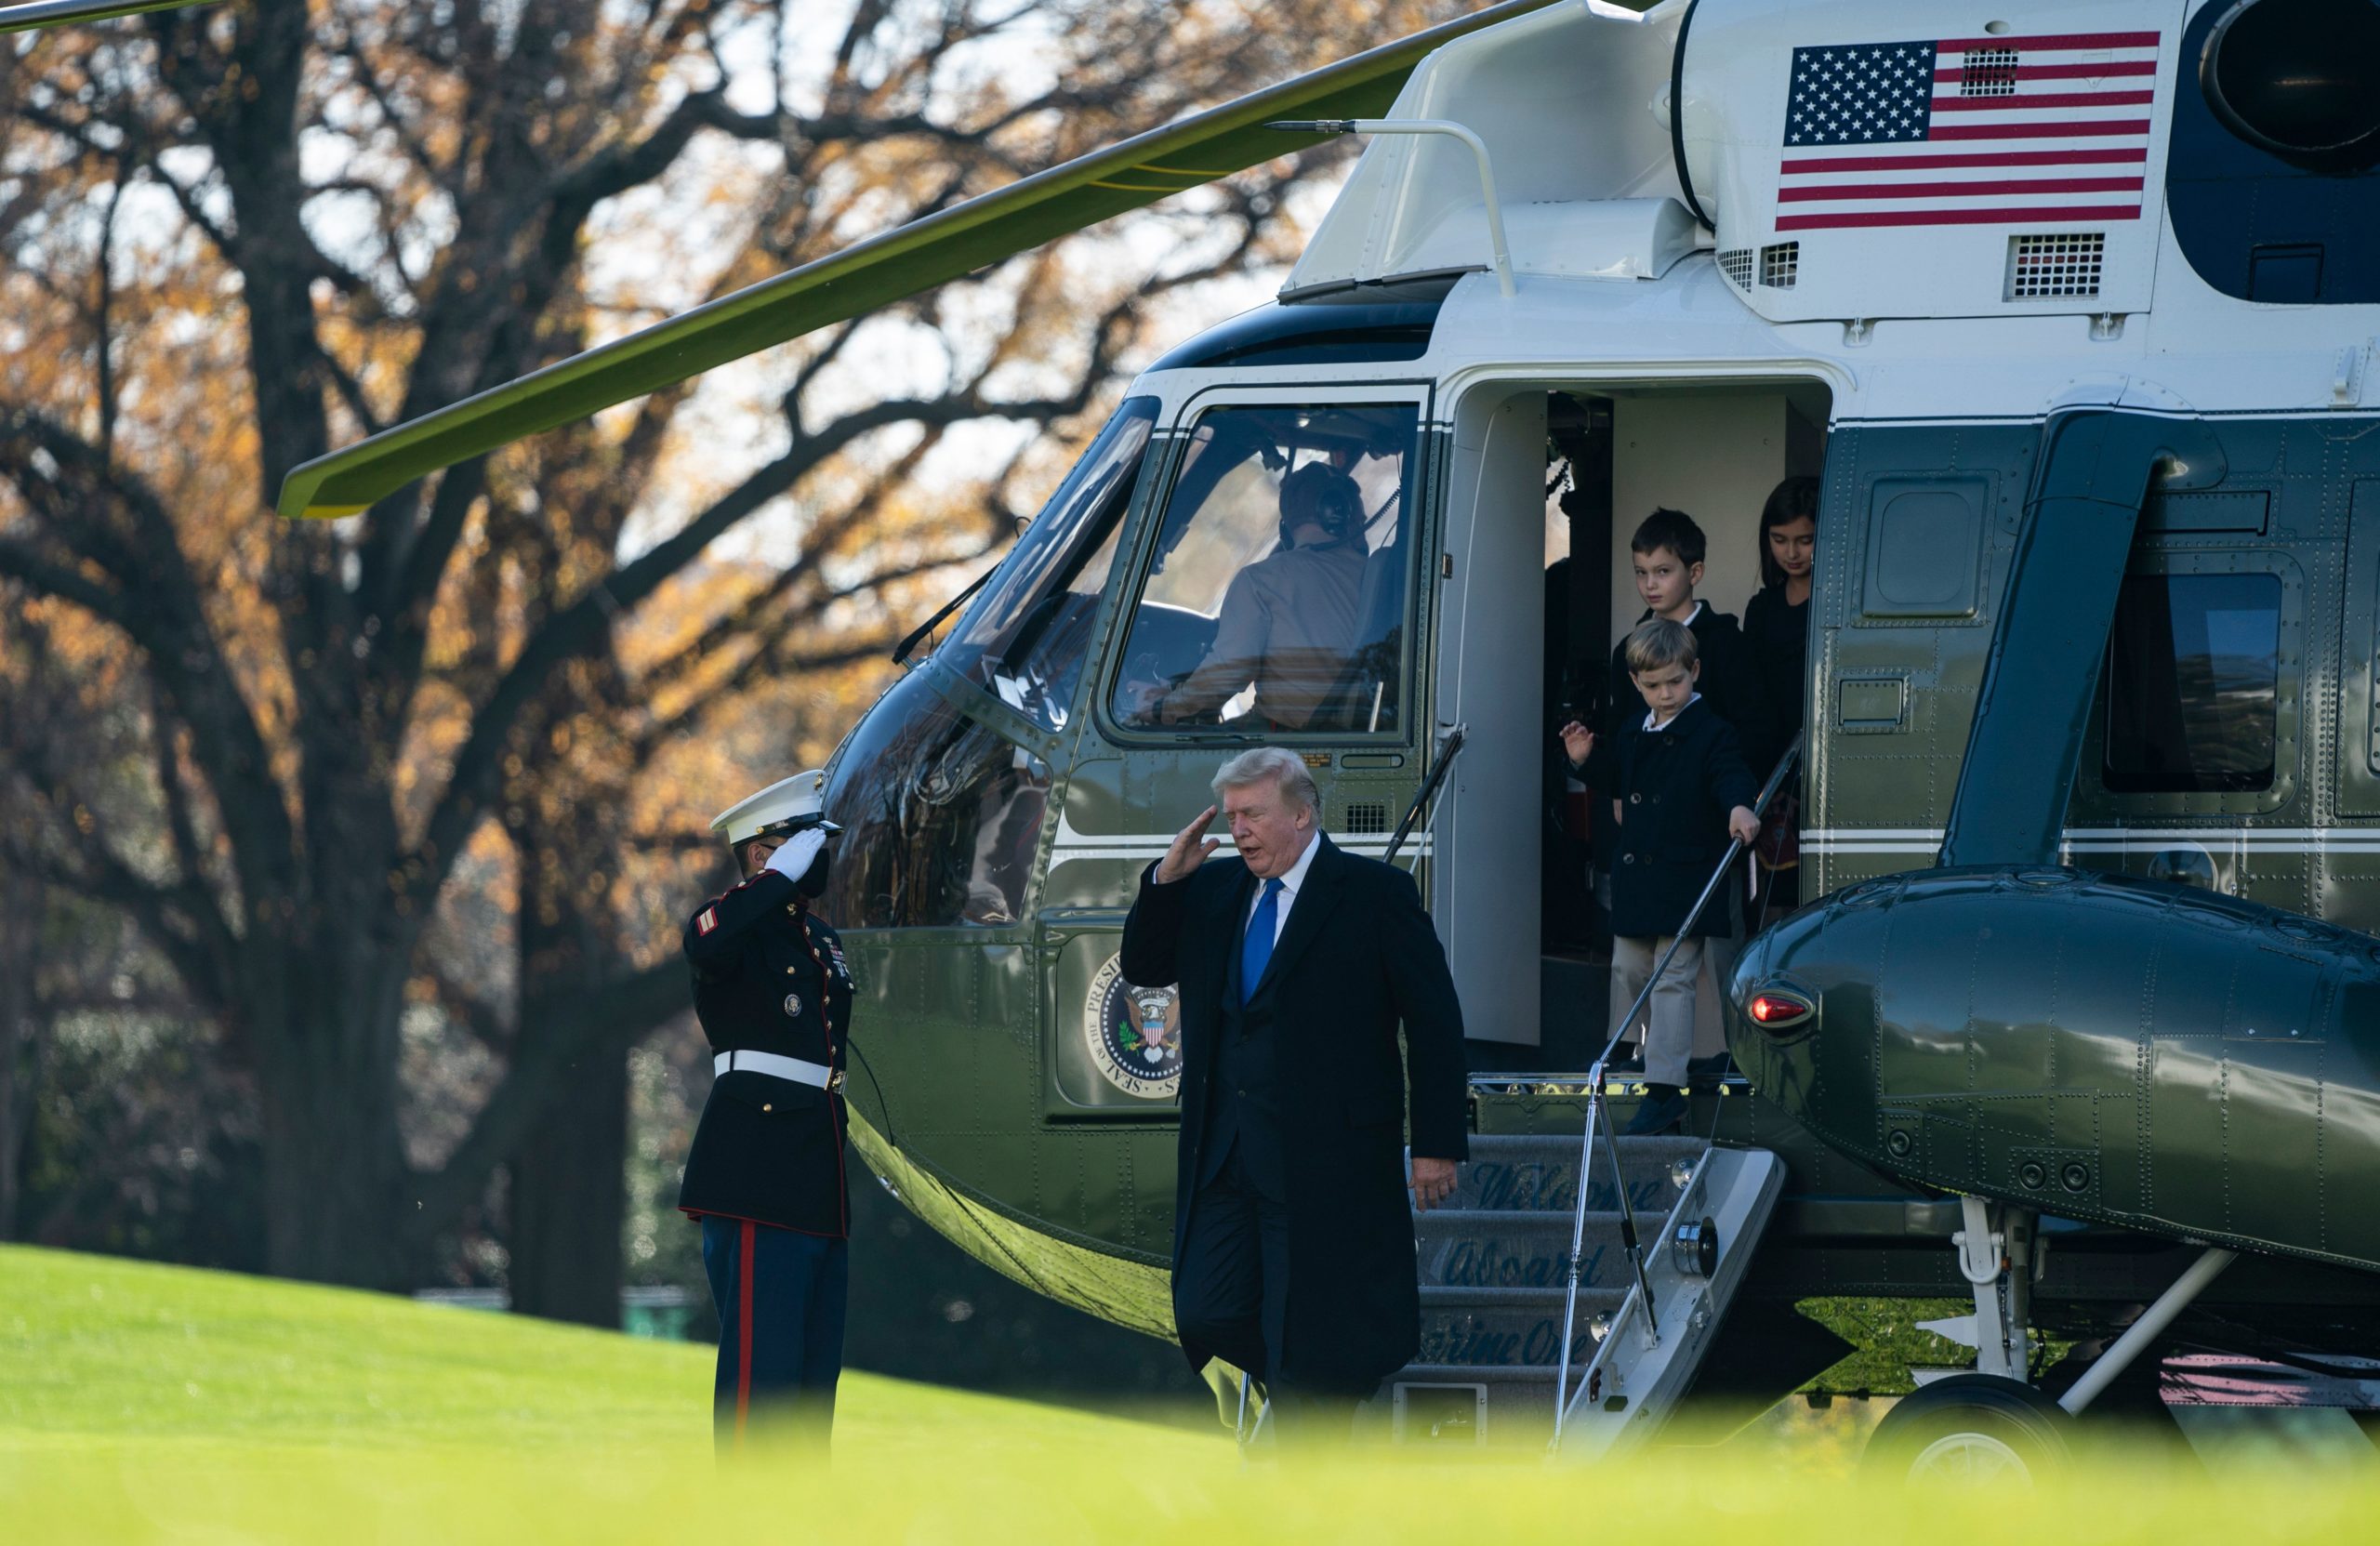 US President Donald Trump, followed by his grandchildren, Arabella, Theodore, and Joseph, arrives at the White House aboard Marine One on November 29, 2020 in Washington, DC. - President Trump spent the Thanksgiving weekend at Camp David and his Trump National Golf Course in Virginia. (Photo by ALEX EDELMAN/AFP via Getty Images)